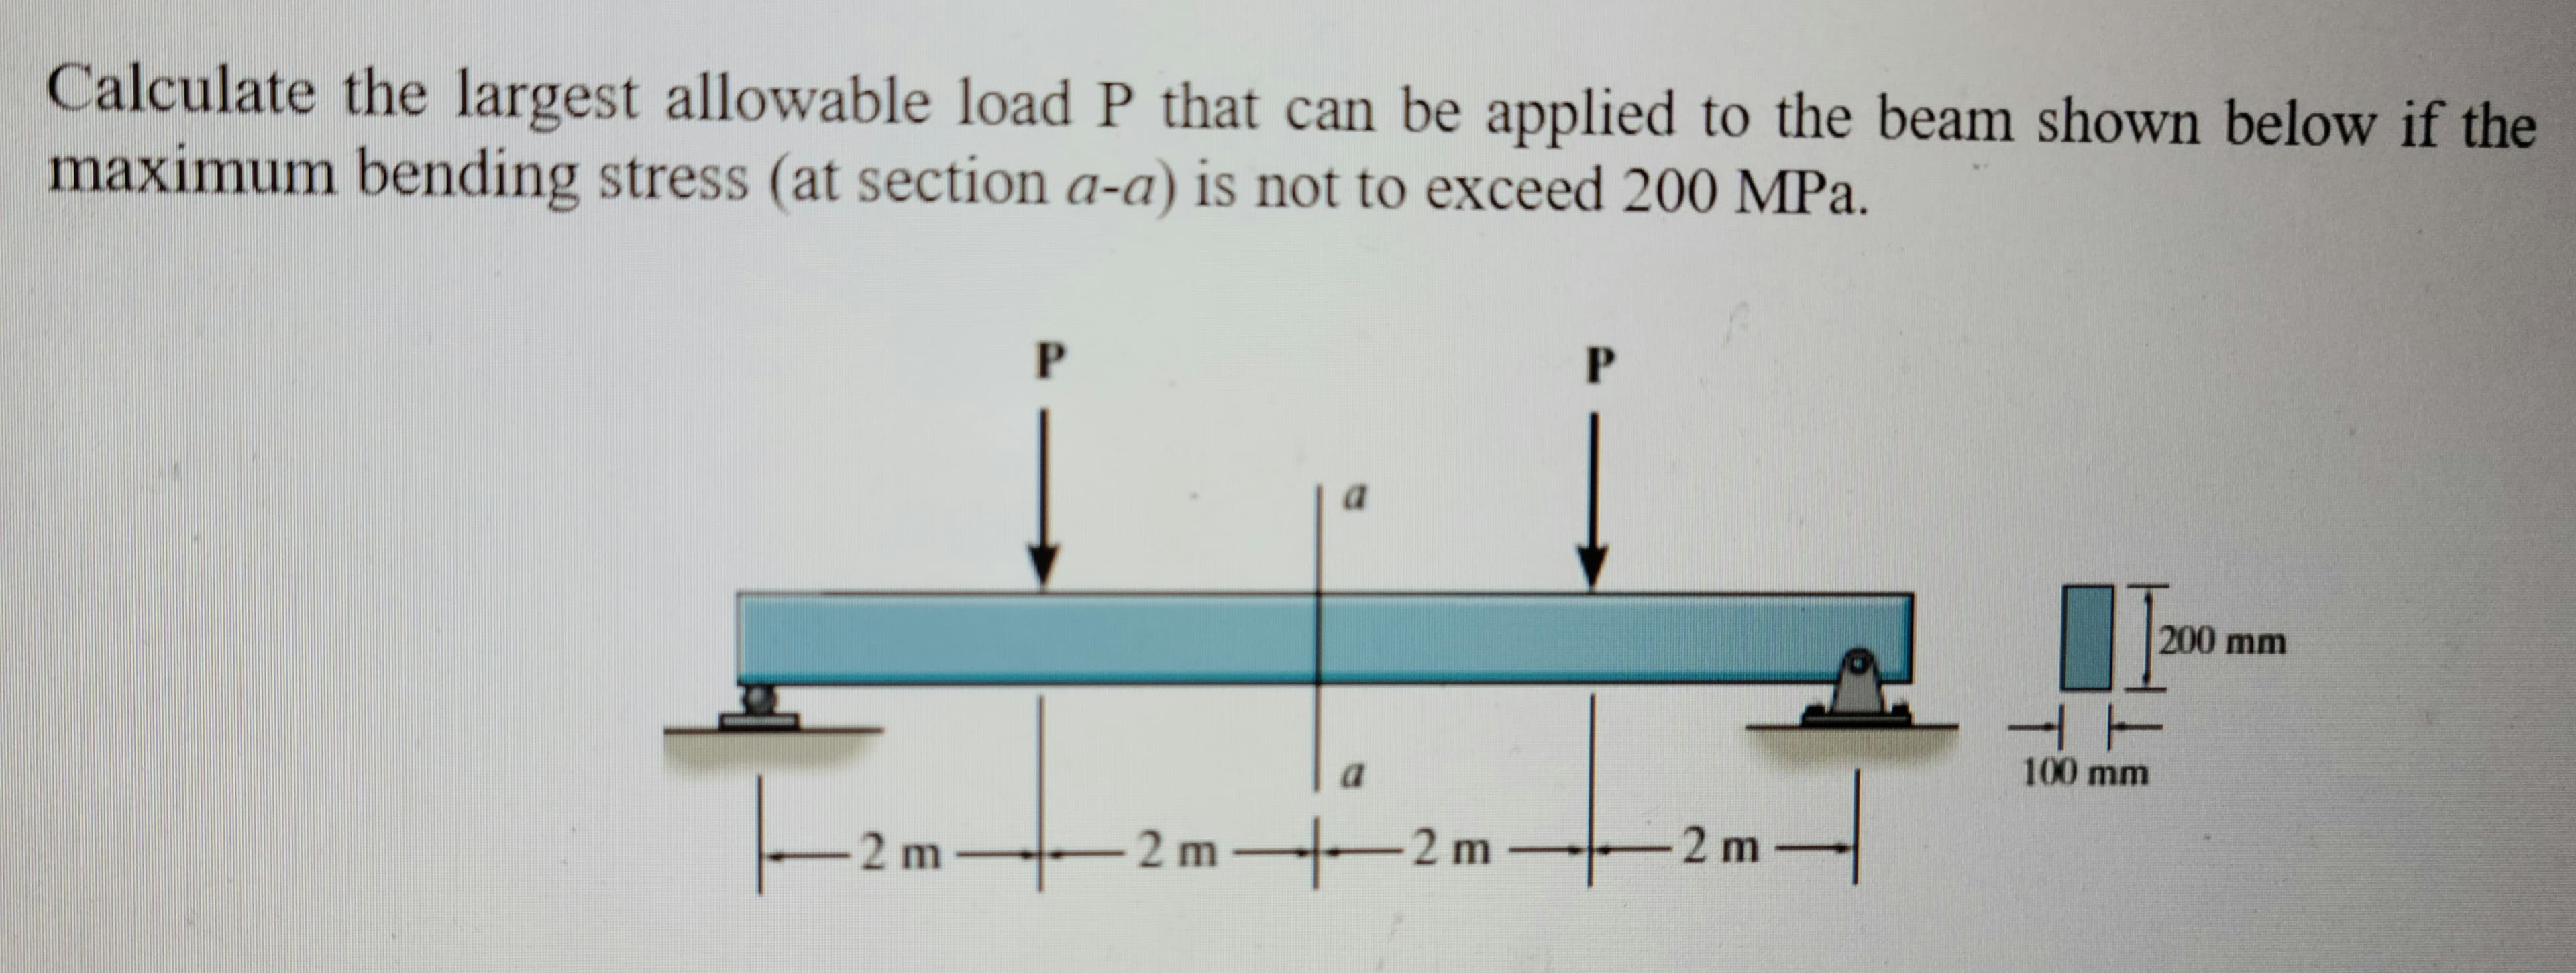 Calculate the largest allowable load P that can be applied to the beam shown below if the
maximum bending stress (at section a-a) is not to exceed 200 MPa.
